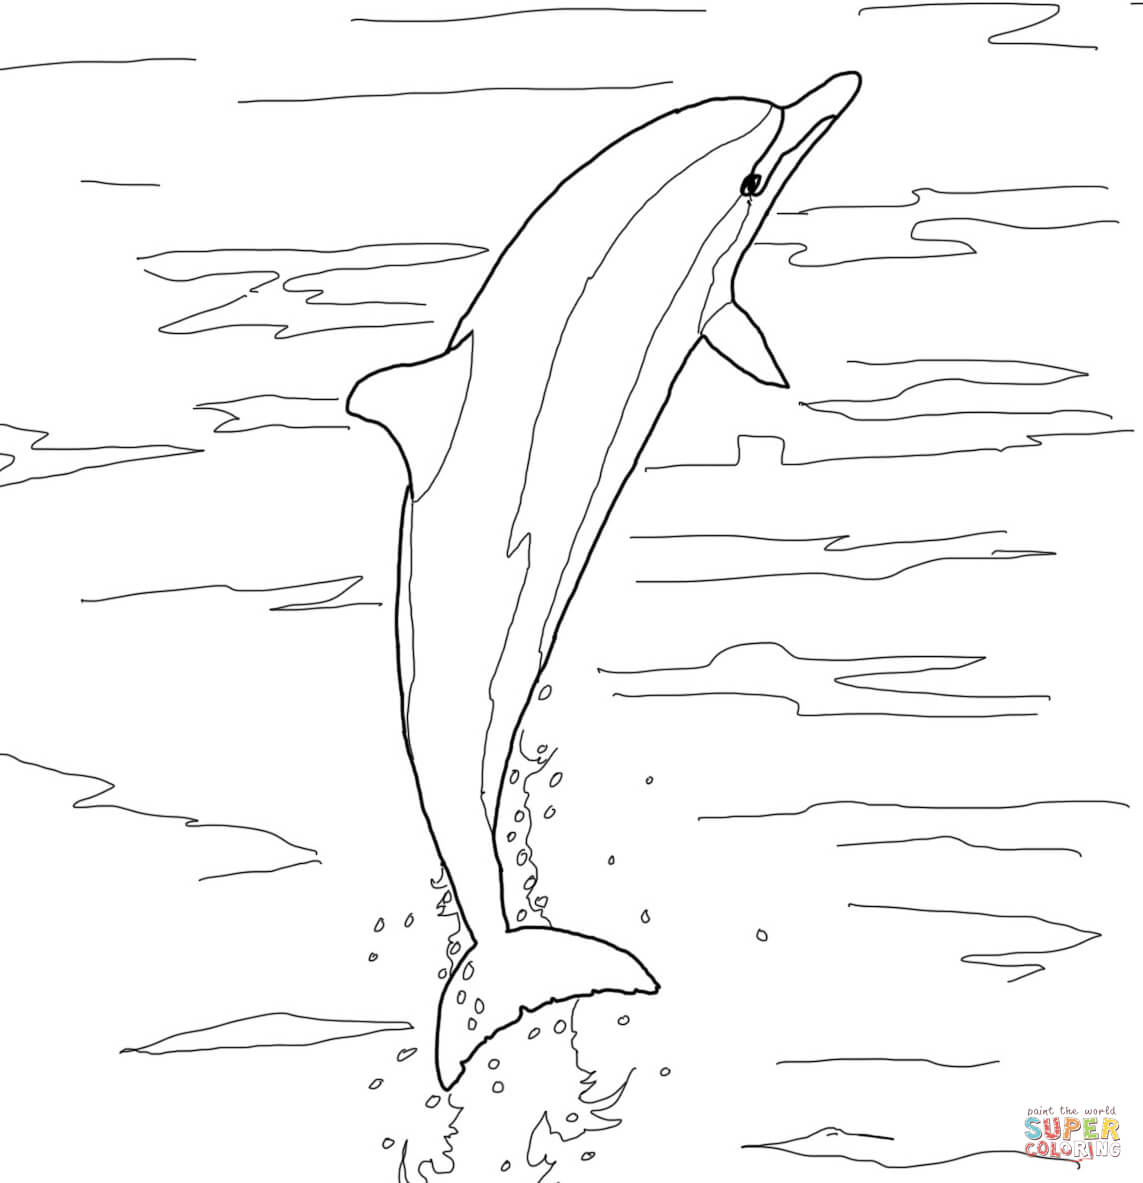 Spinner Dolphin coloring #12, Download drawings